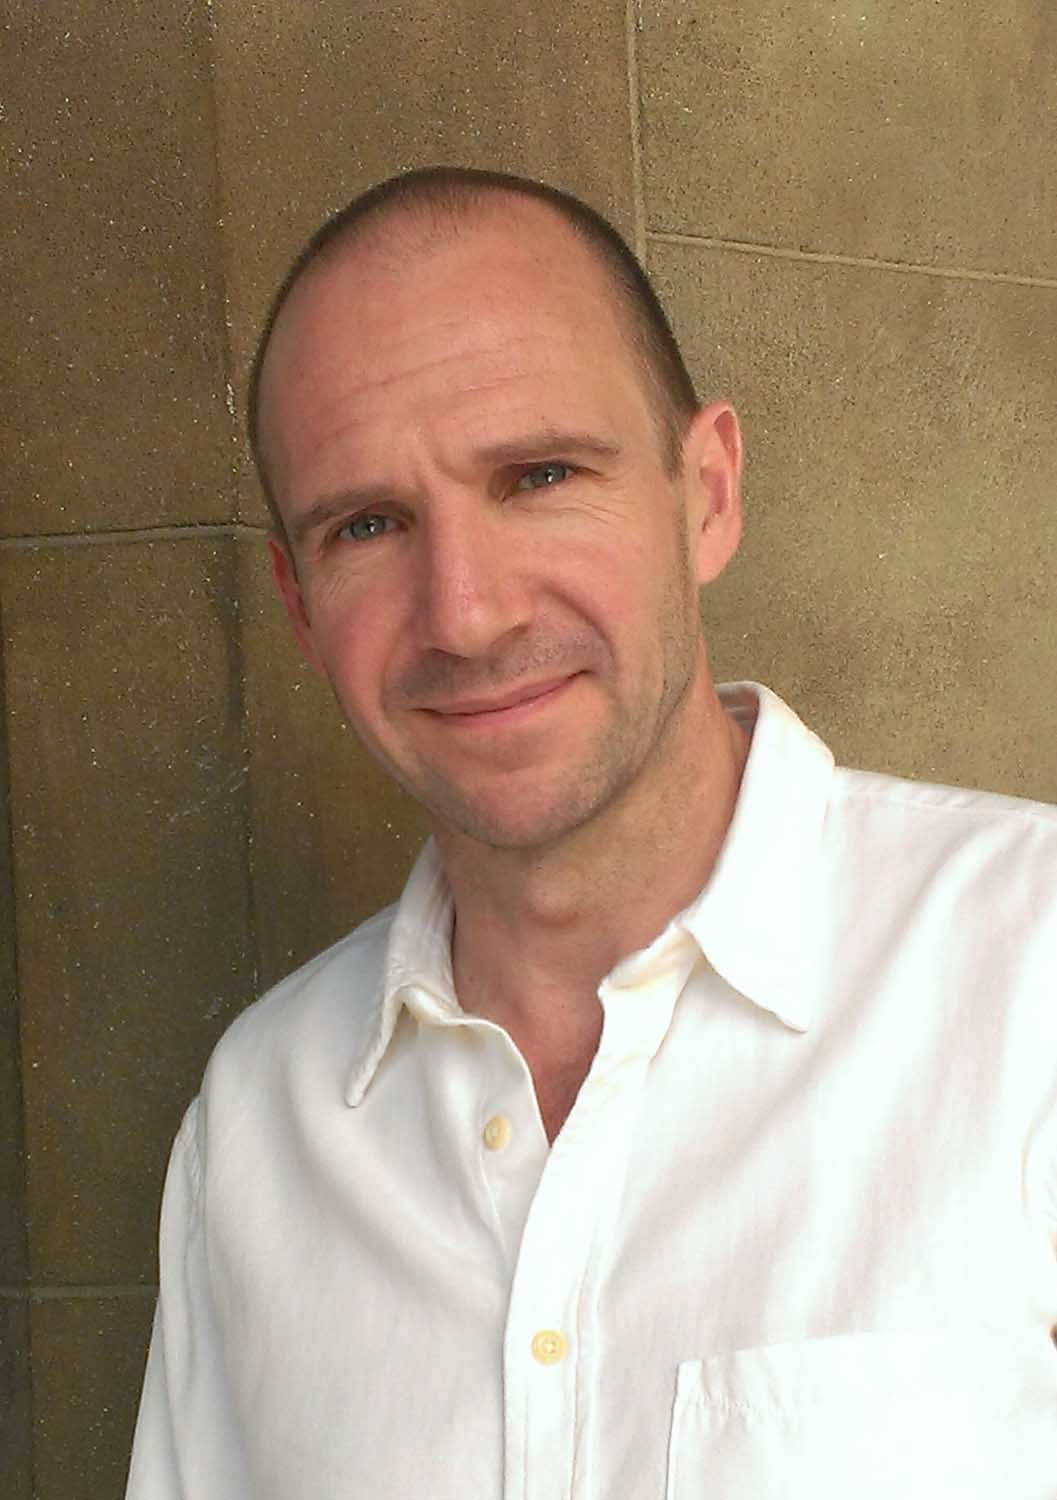 young ralph fiennes